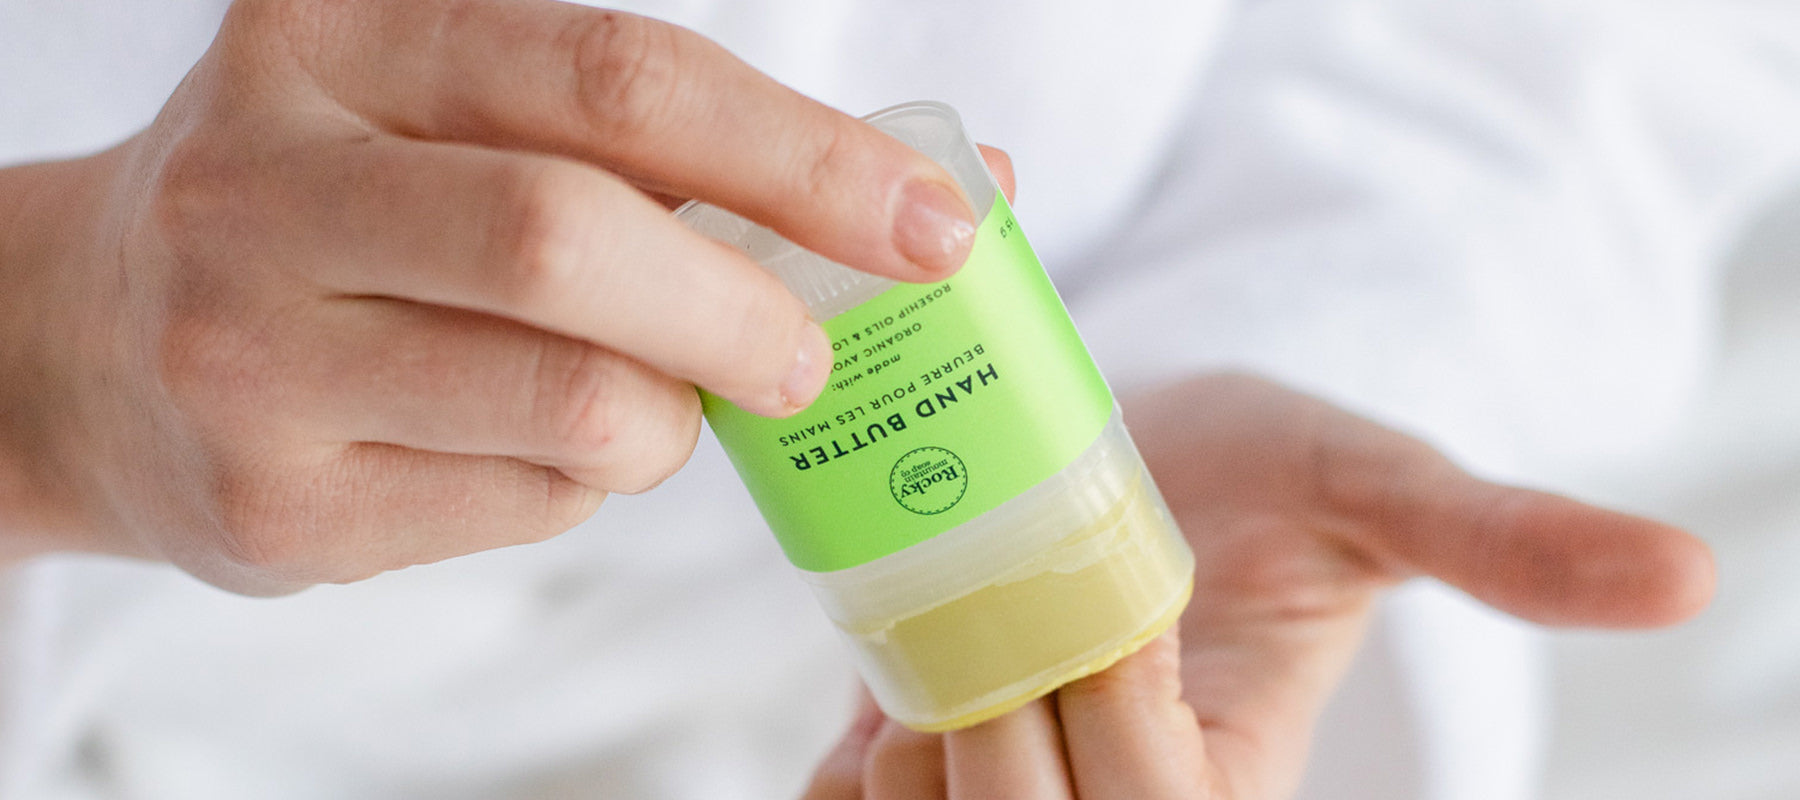 Image of hands rubbing moisturizing organic hand butter onto cuticles.